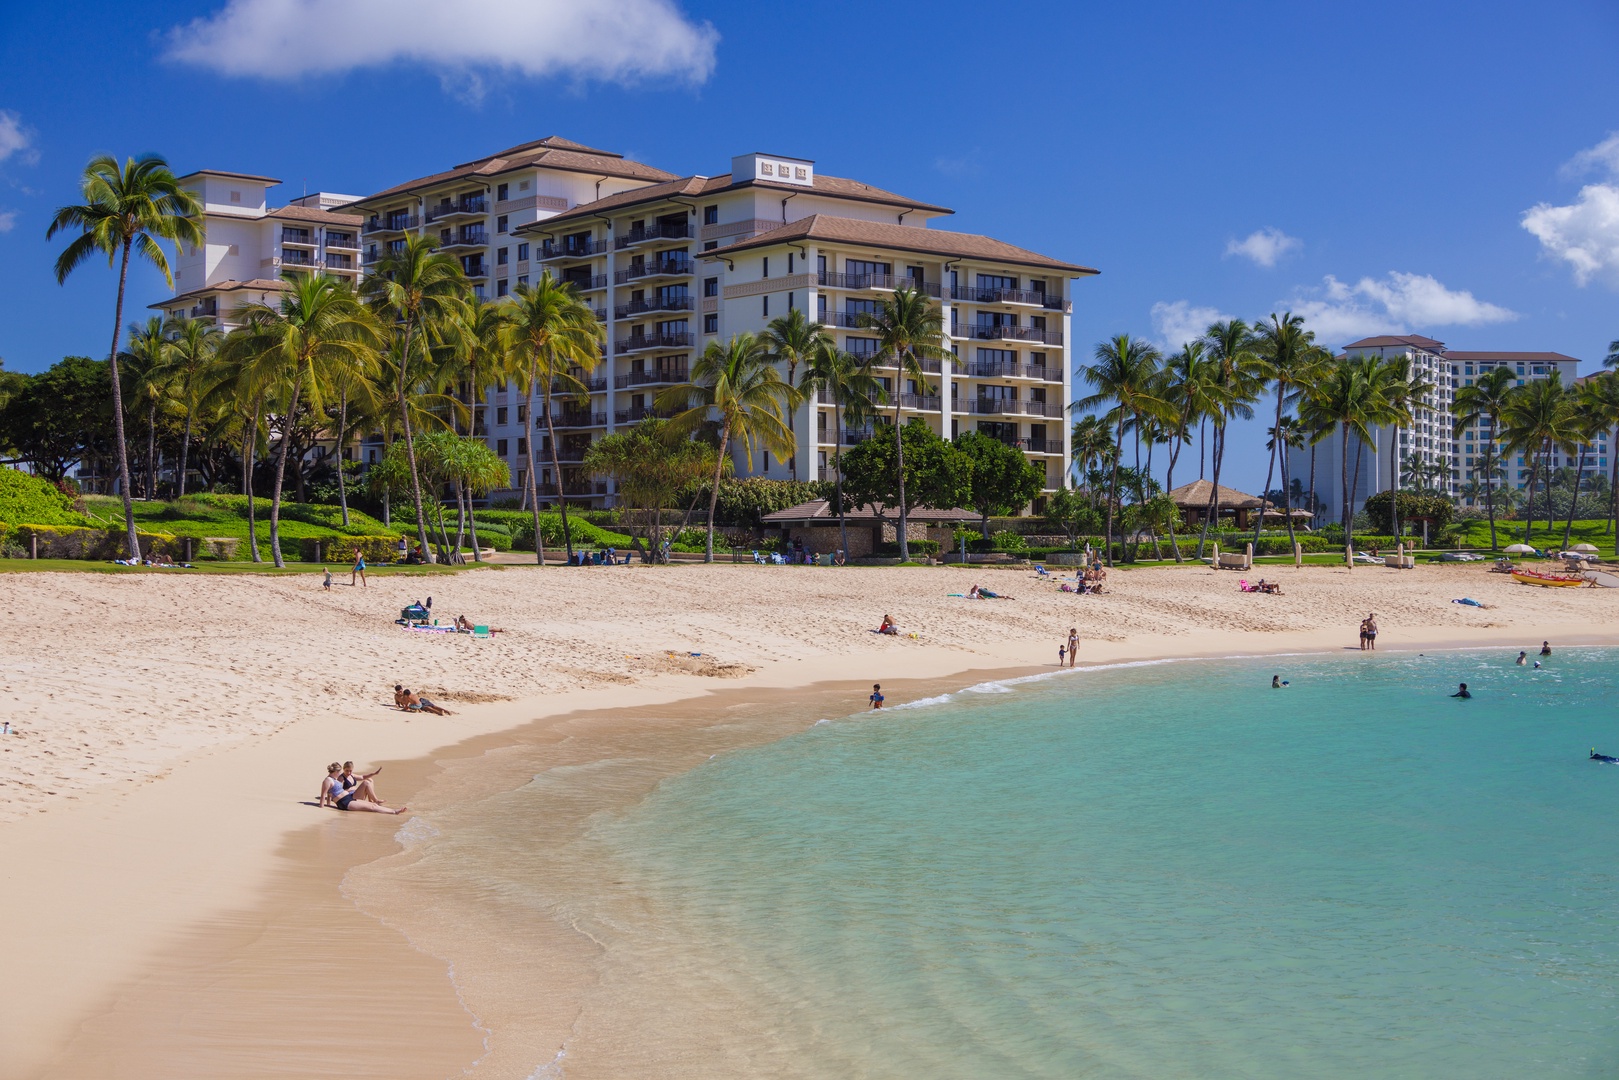 Kapolei Vacation Rentals, Ko Olina Kai 1097C - The private lagoon at Ko Olina is the perfect place for a relaxing afternoon in the sun.